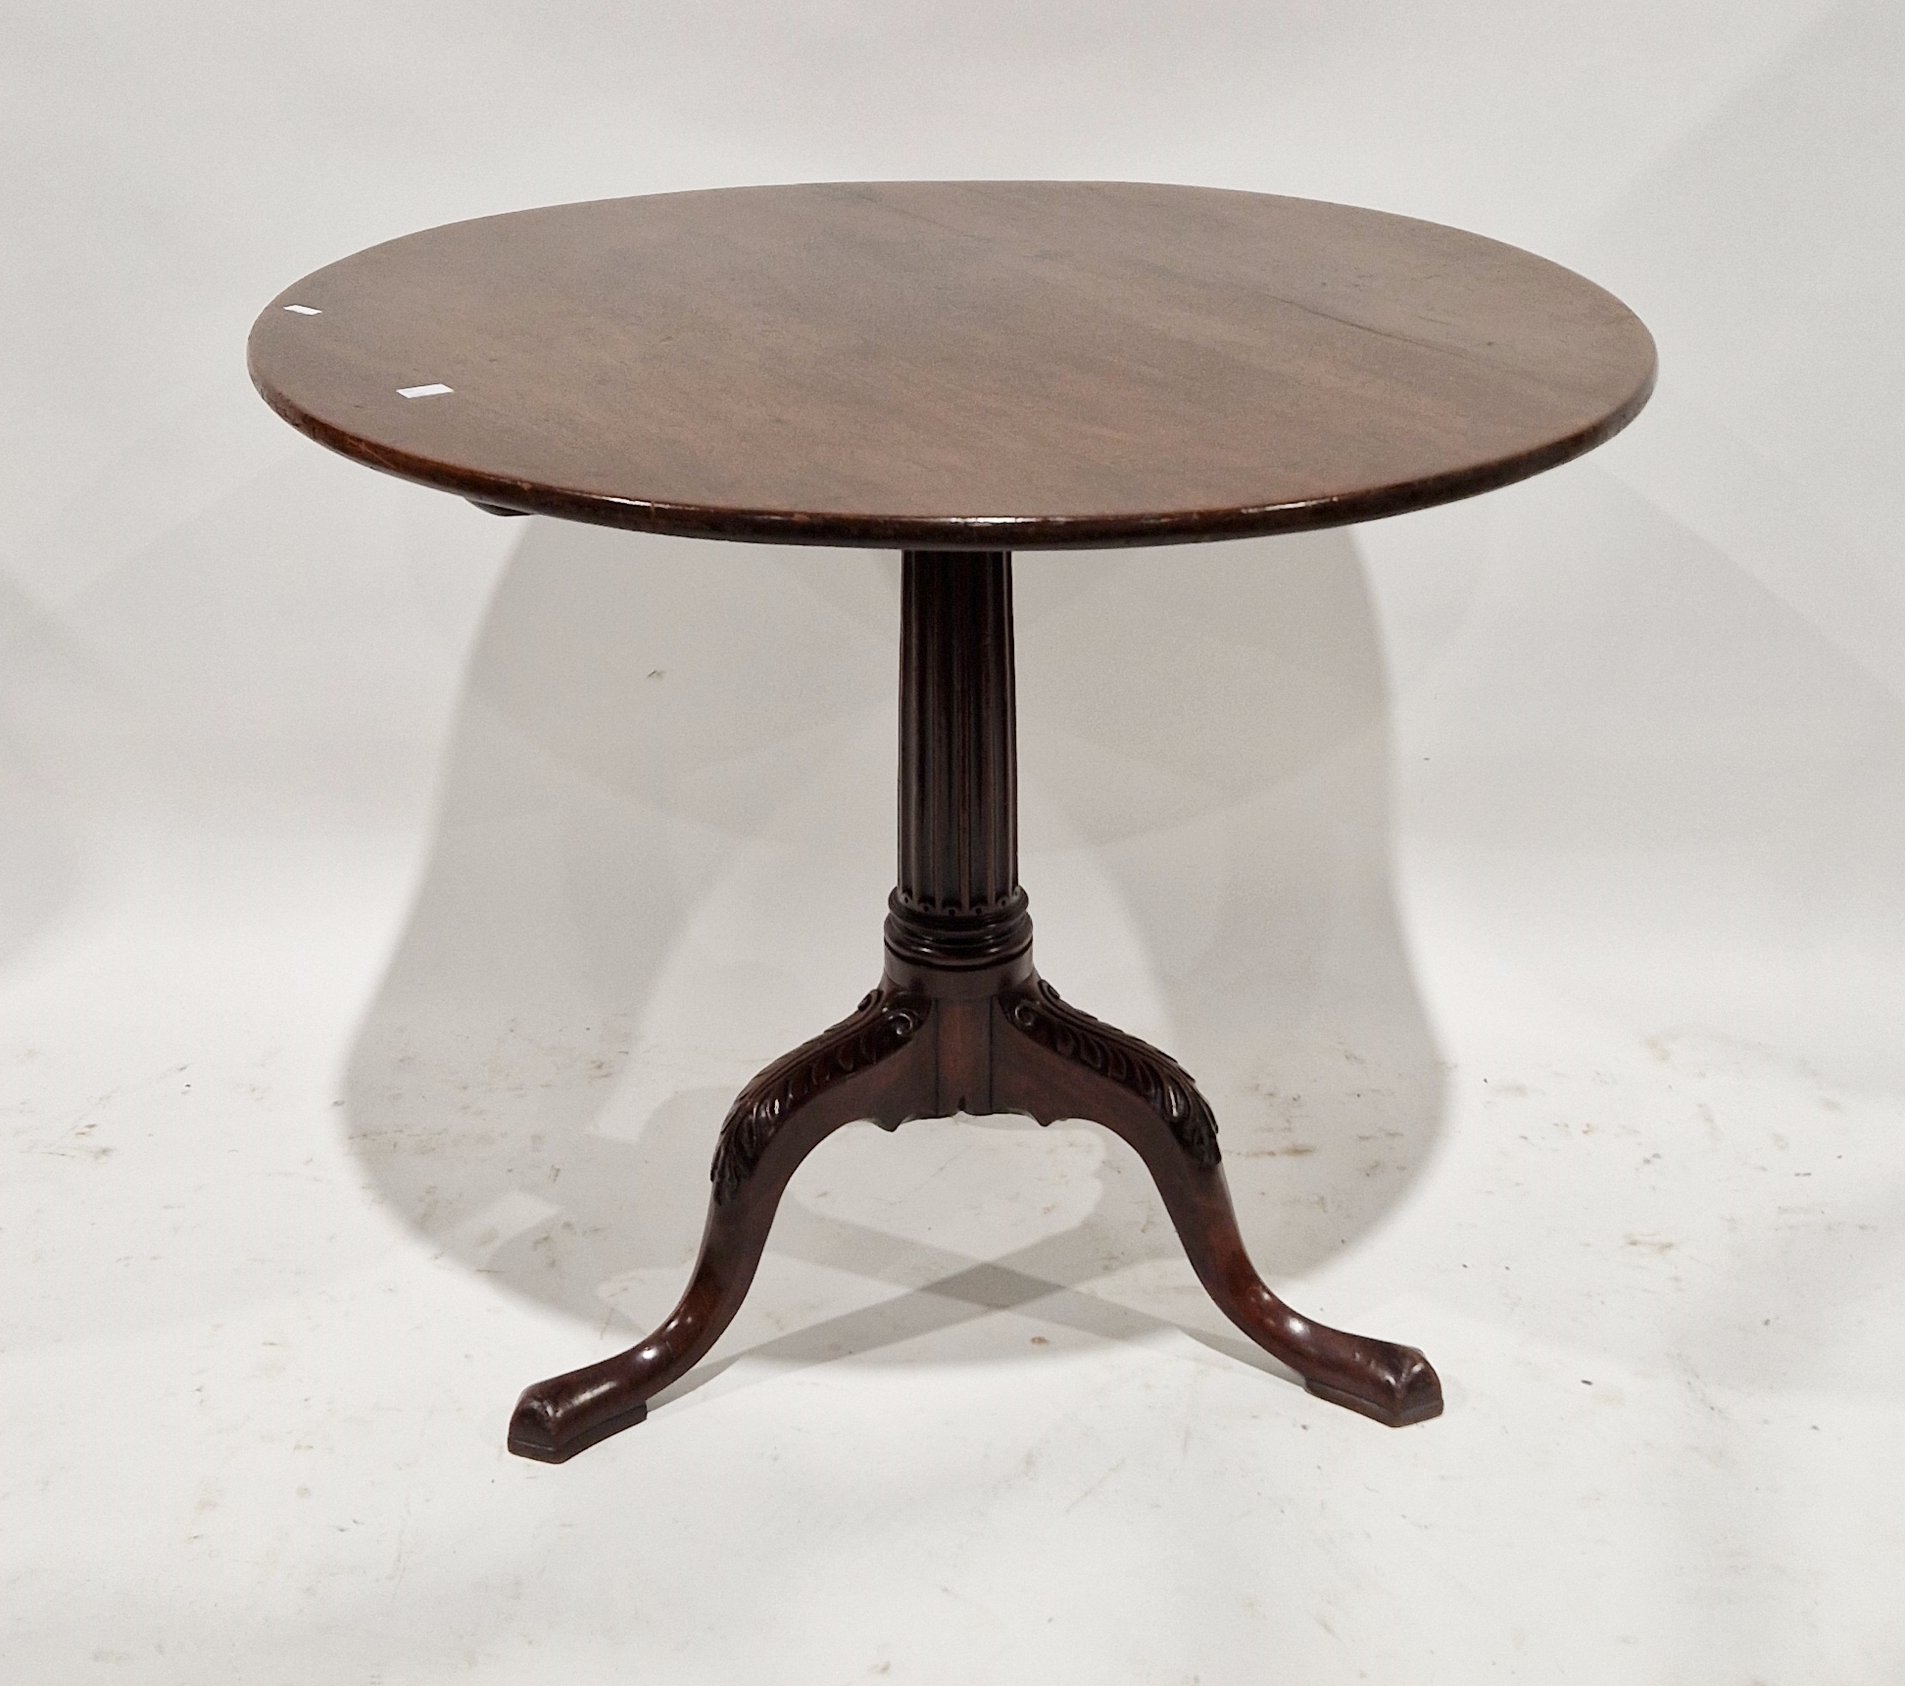 19th century mahogany snap top tripod occasional table, circular, on fluted column and the ogee